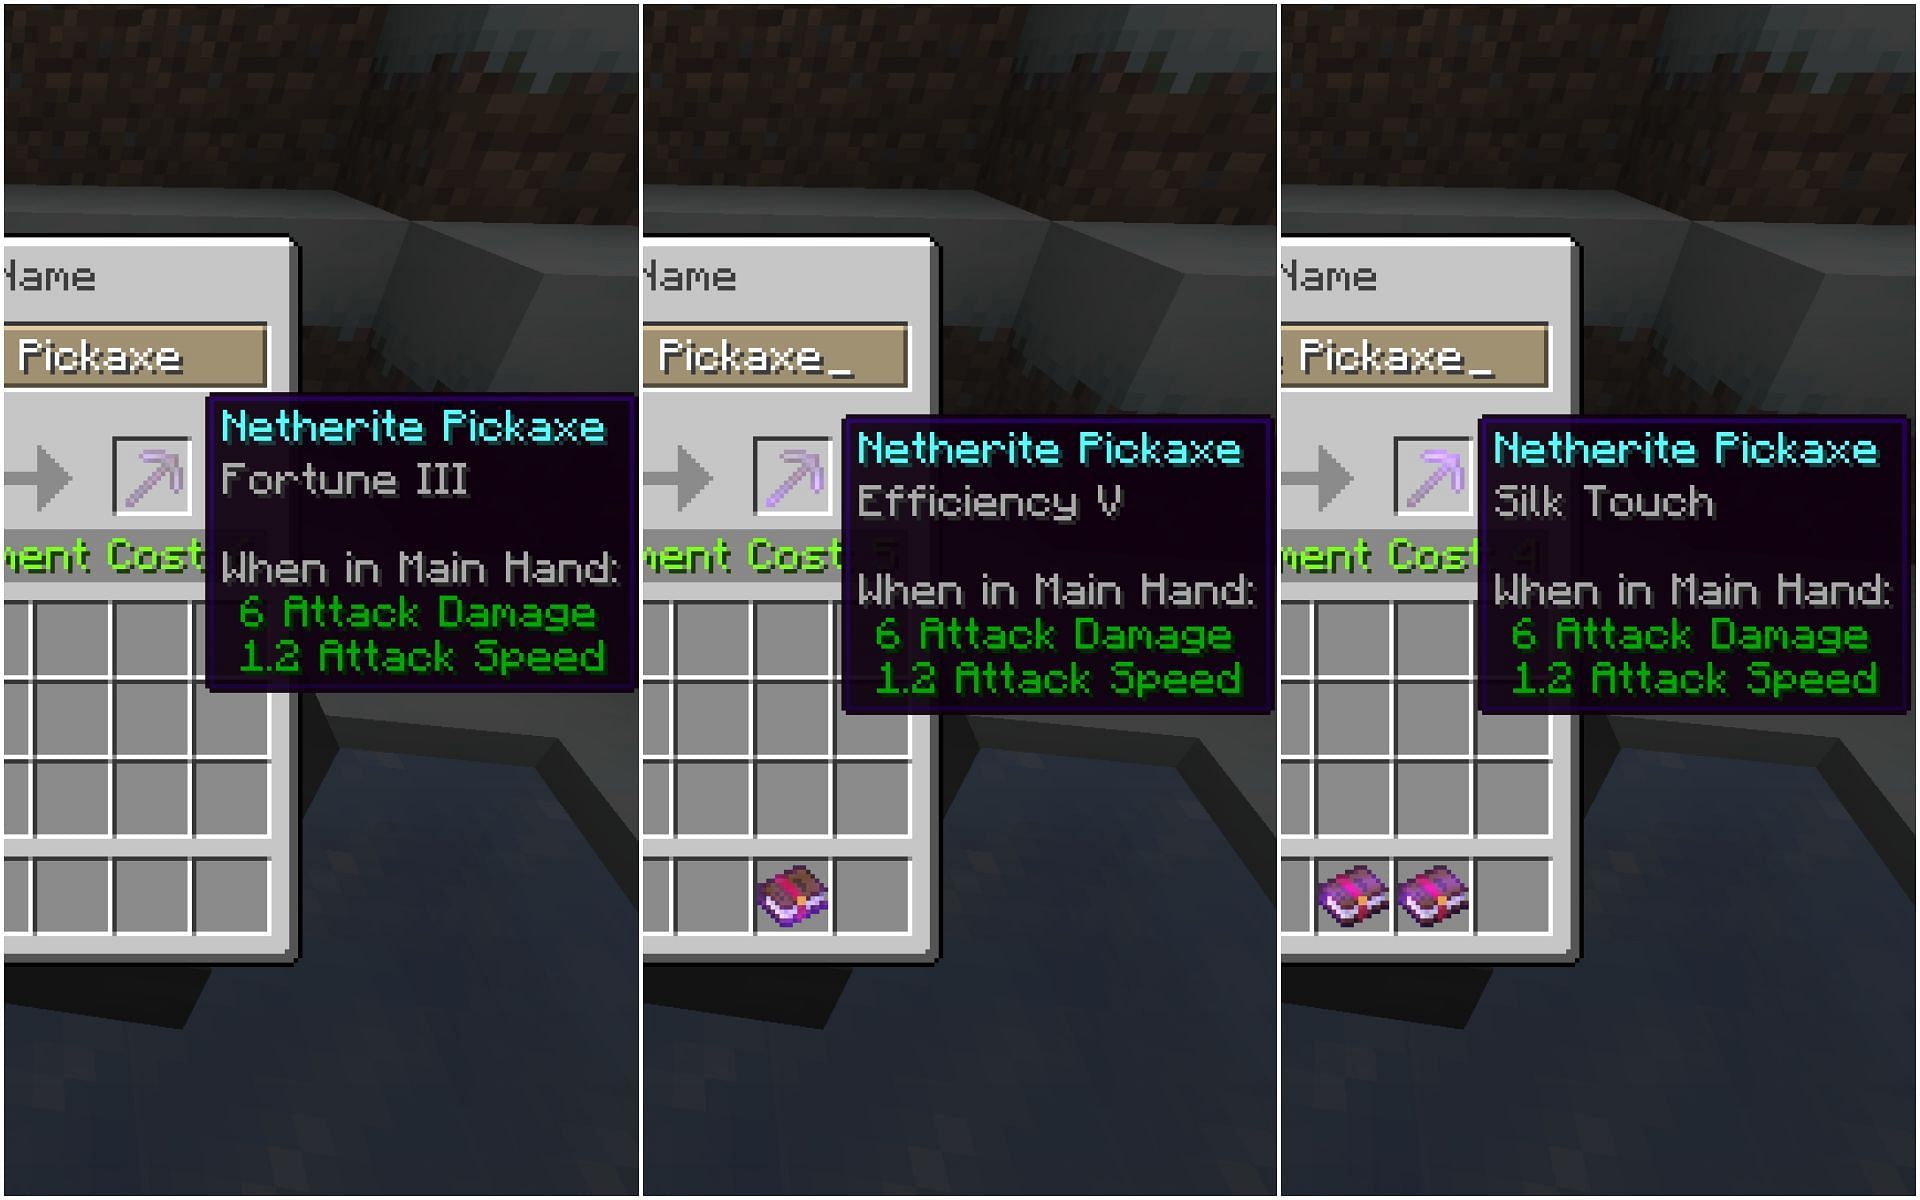 The 5 Most Useful Minecraft Enchantments For Exploring